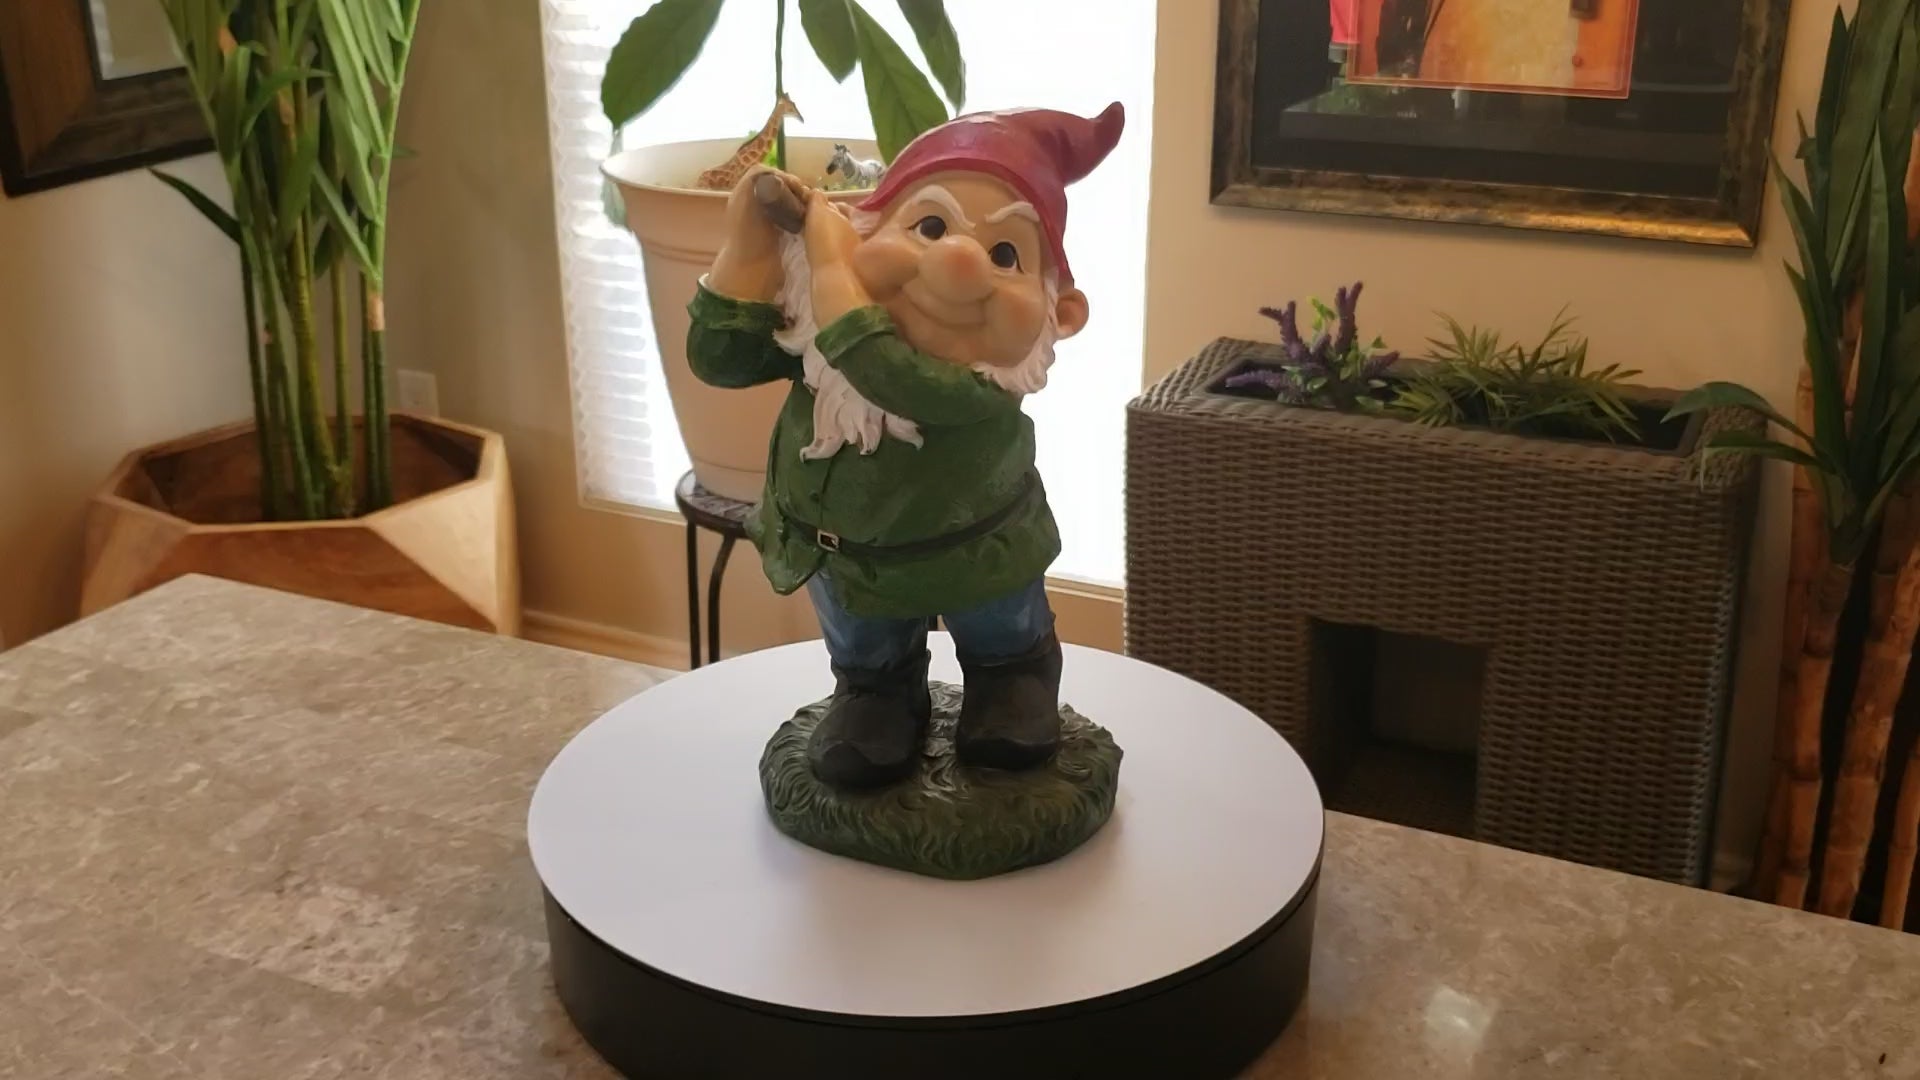 Auction for sale golfing gnome statue